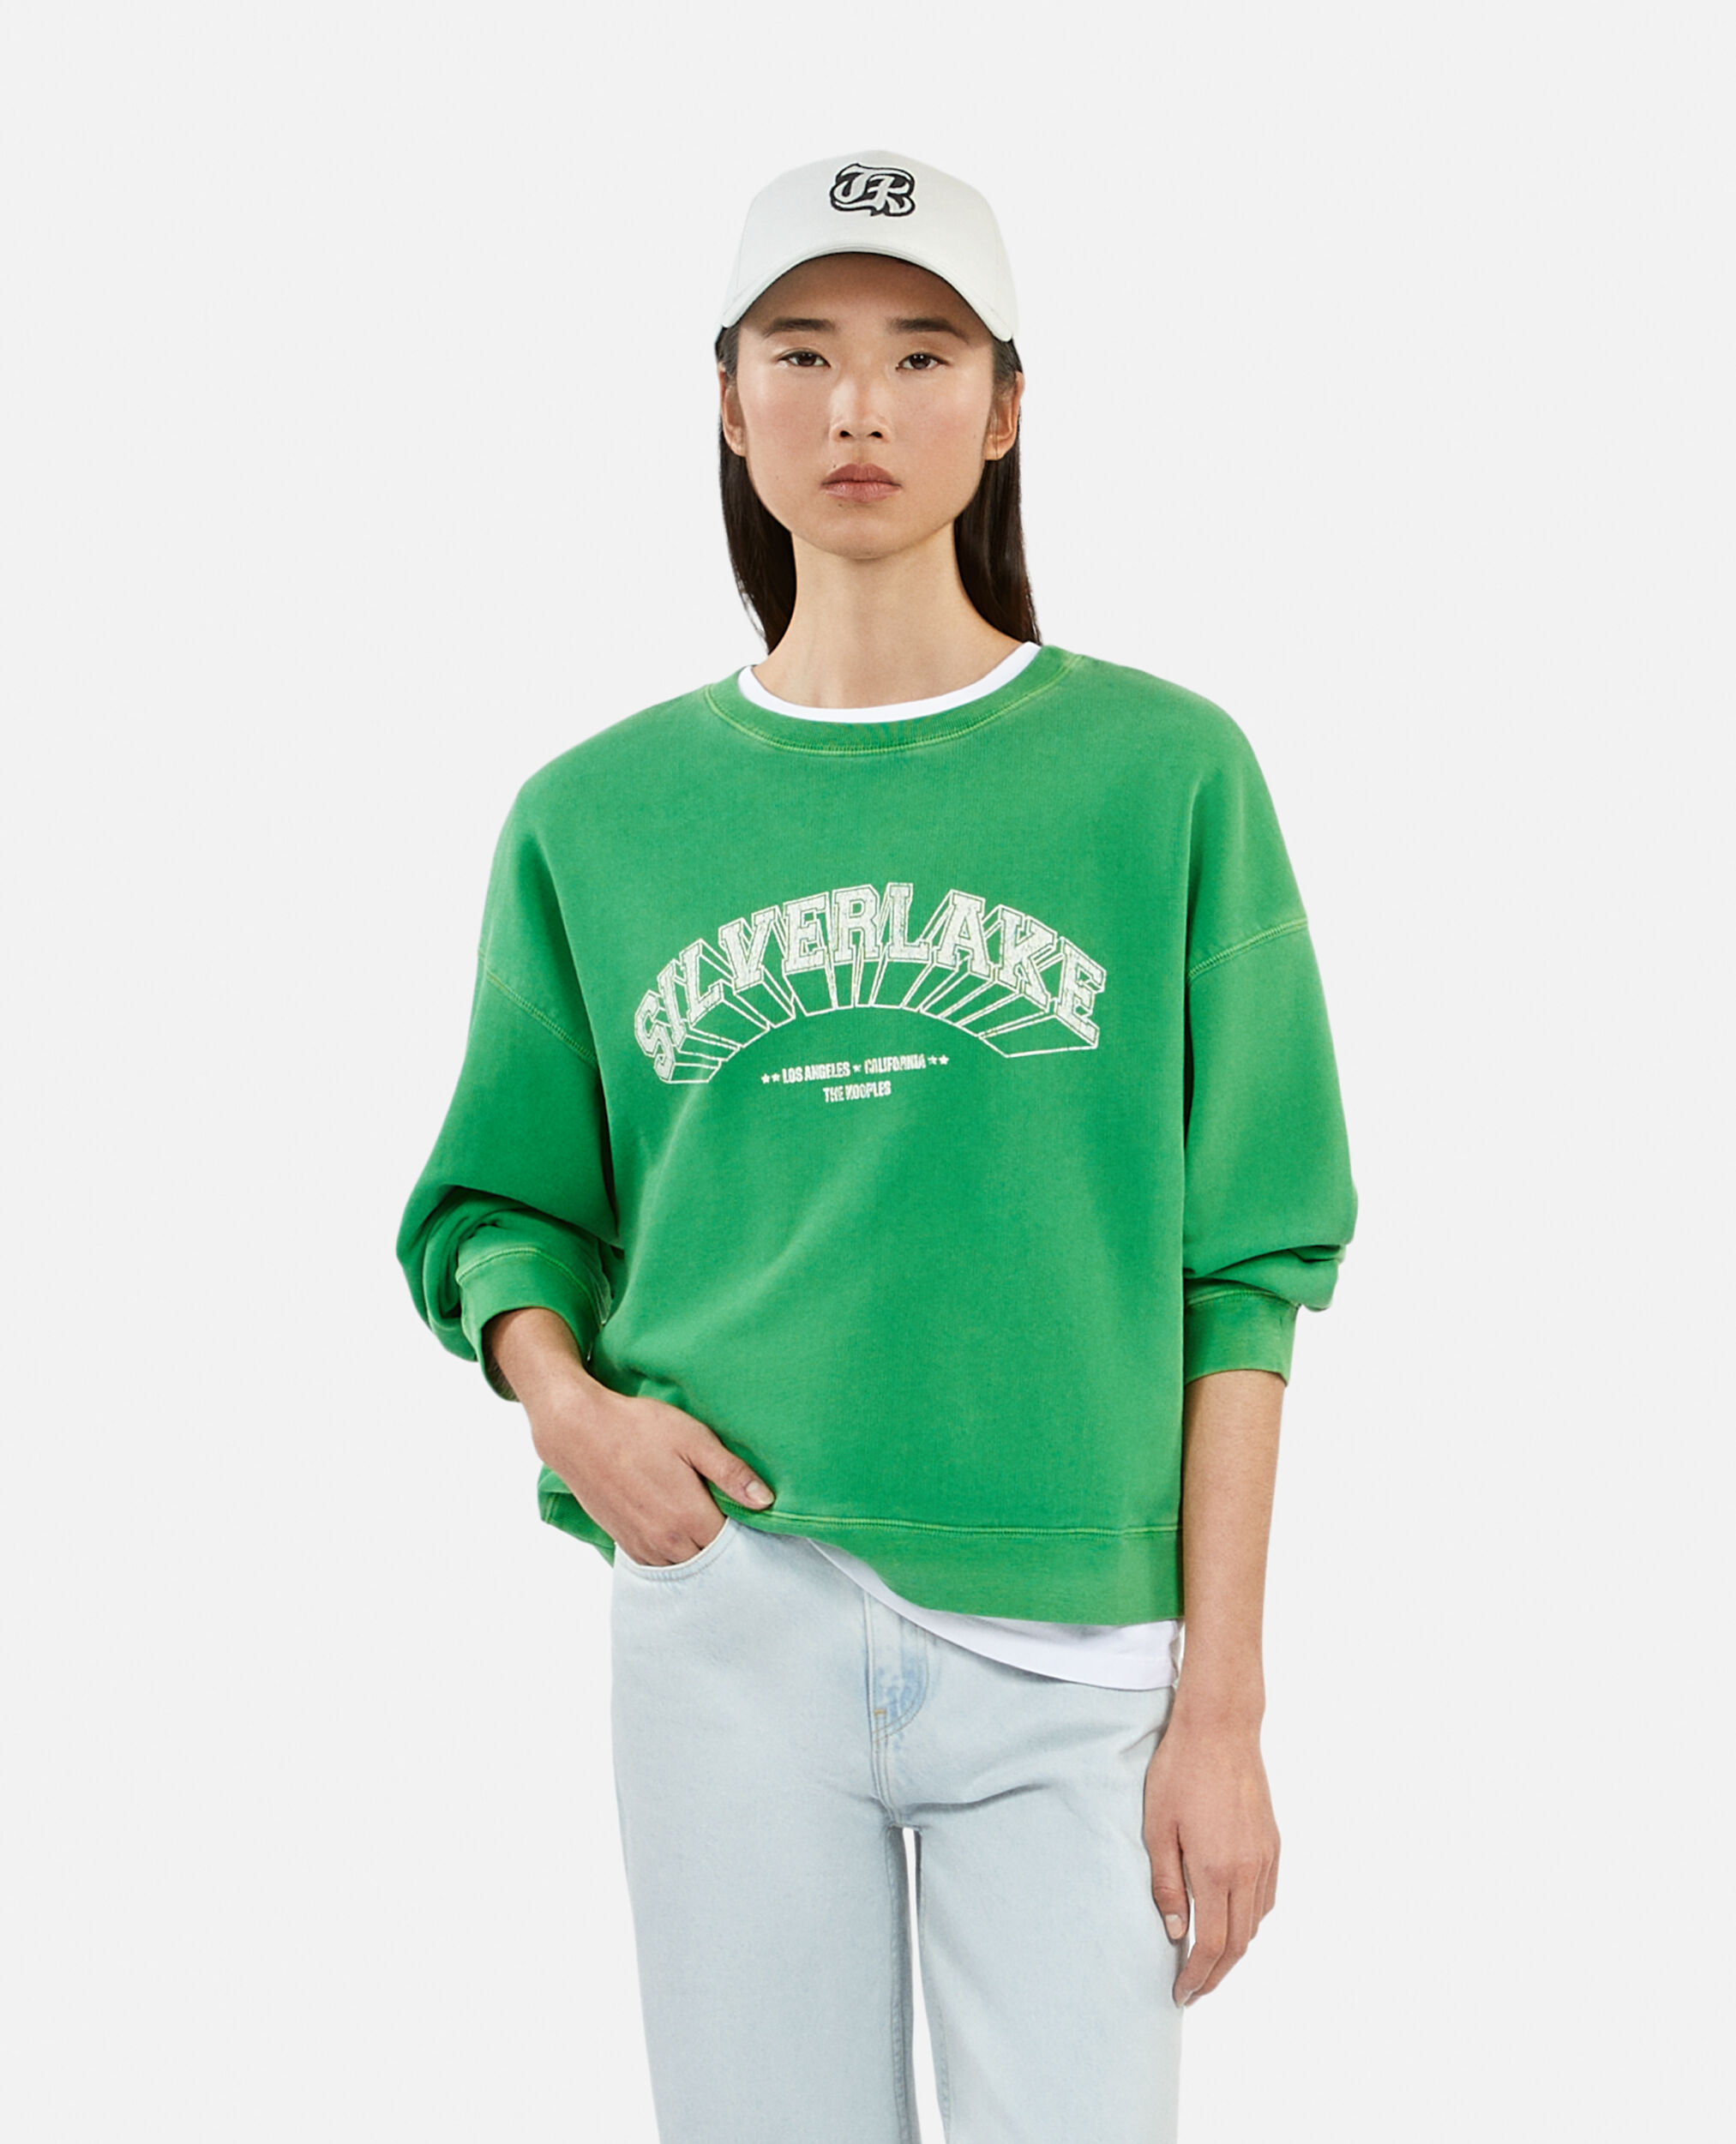 Green sweatshirt with Silverlake serigraphy, GREEN, hi-res image number null